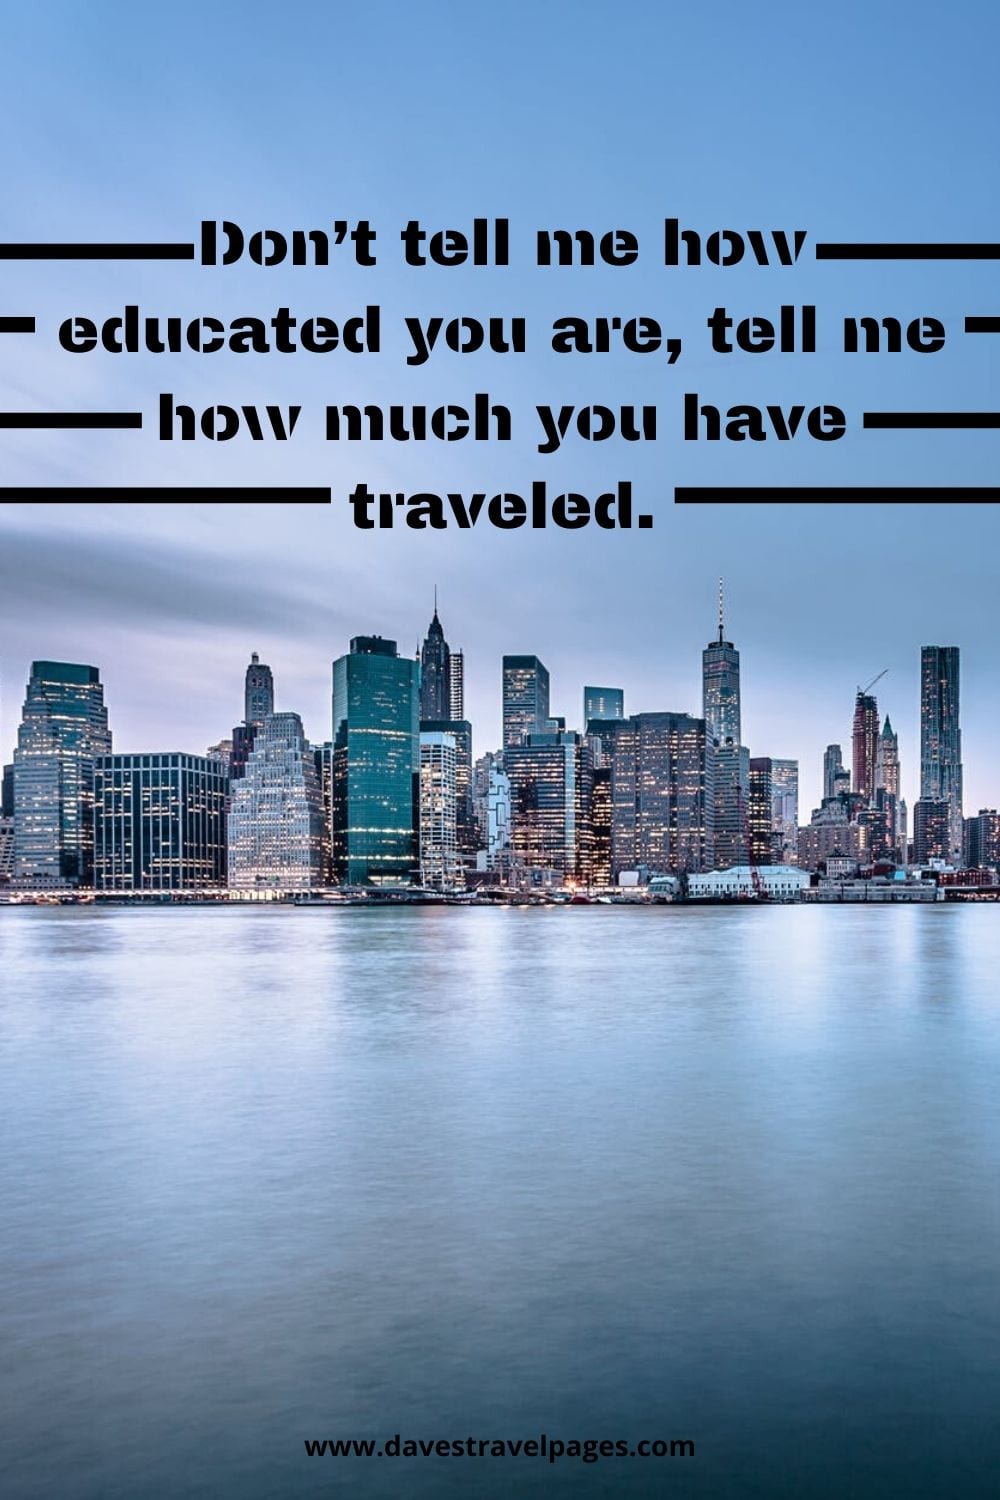 Don’t tell me how educated you are, tell me how much you have traveled.” – Mohammed